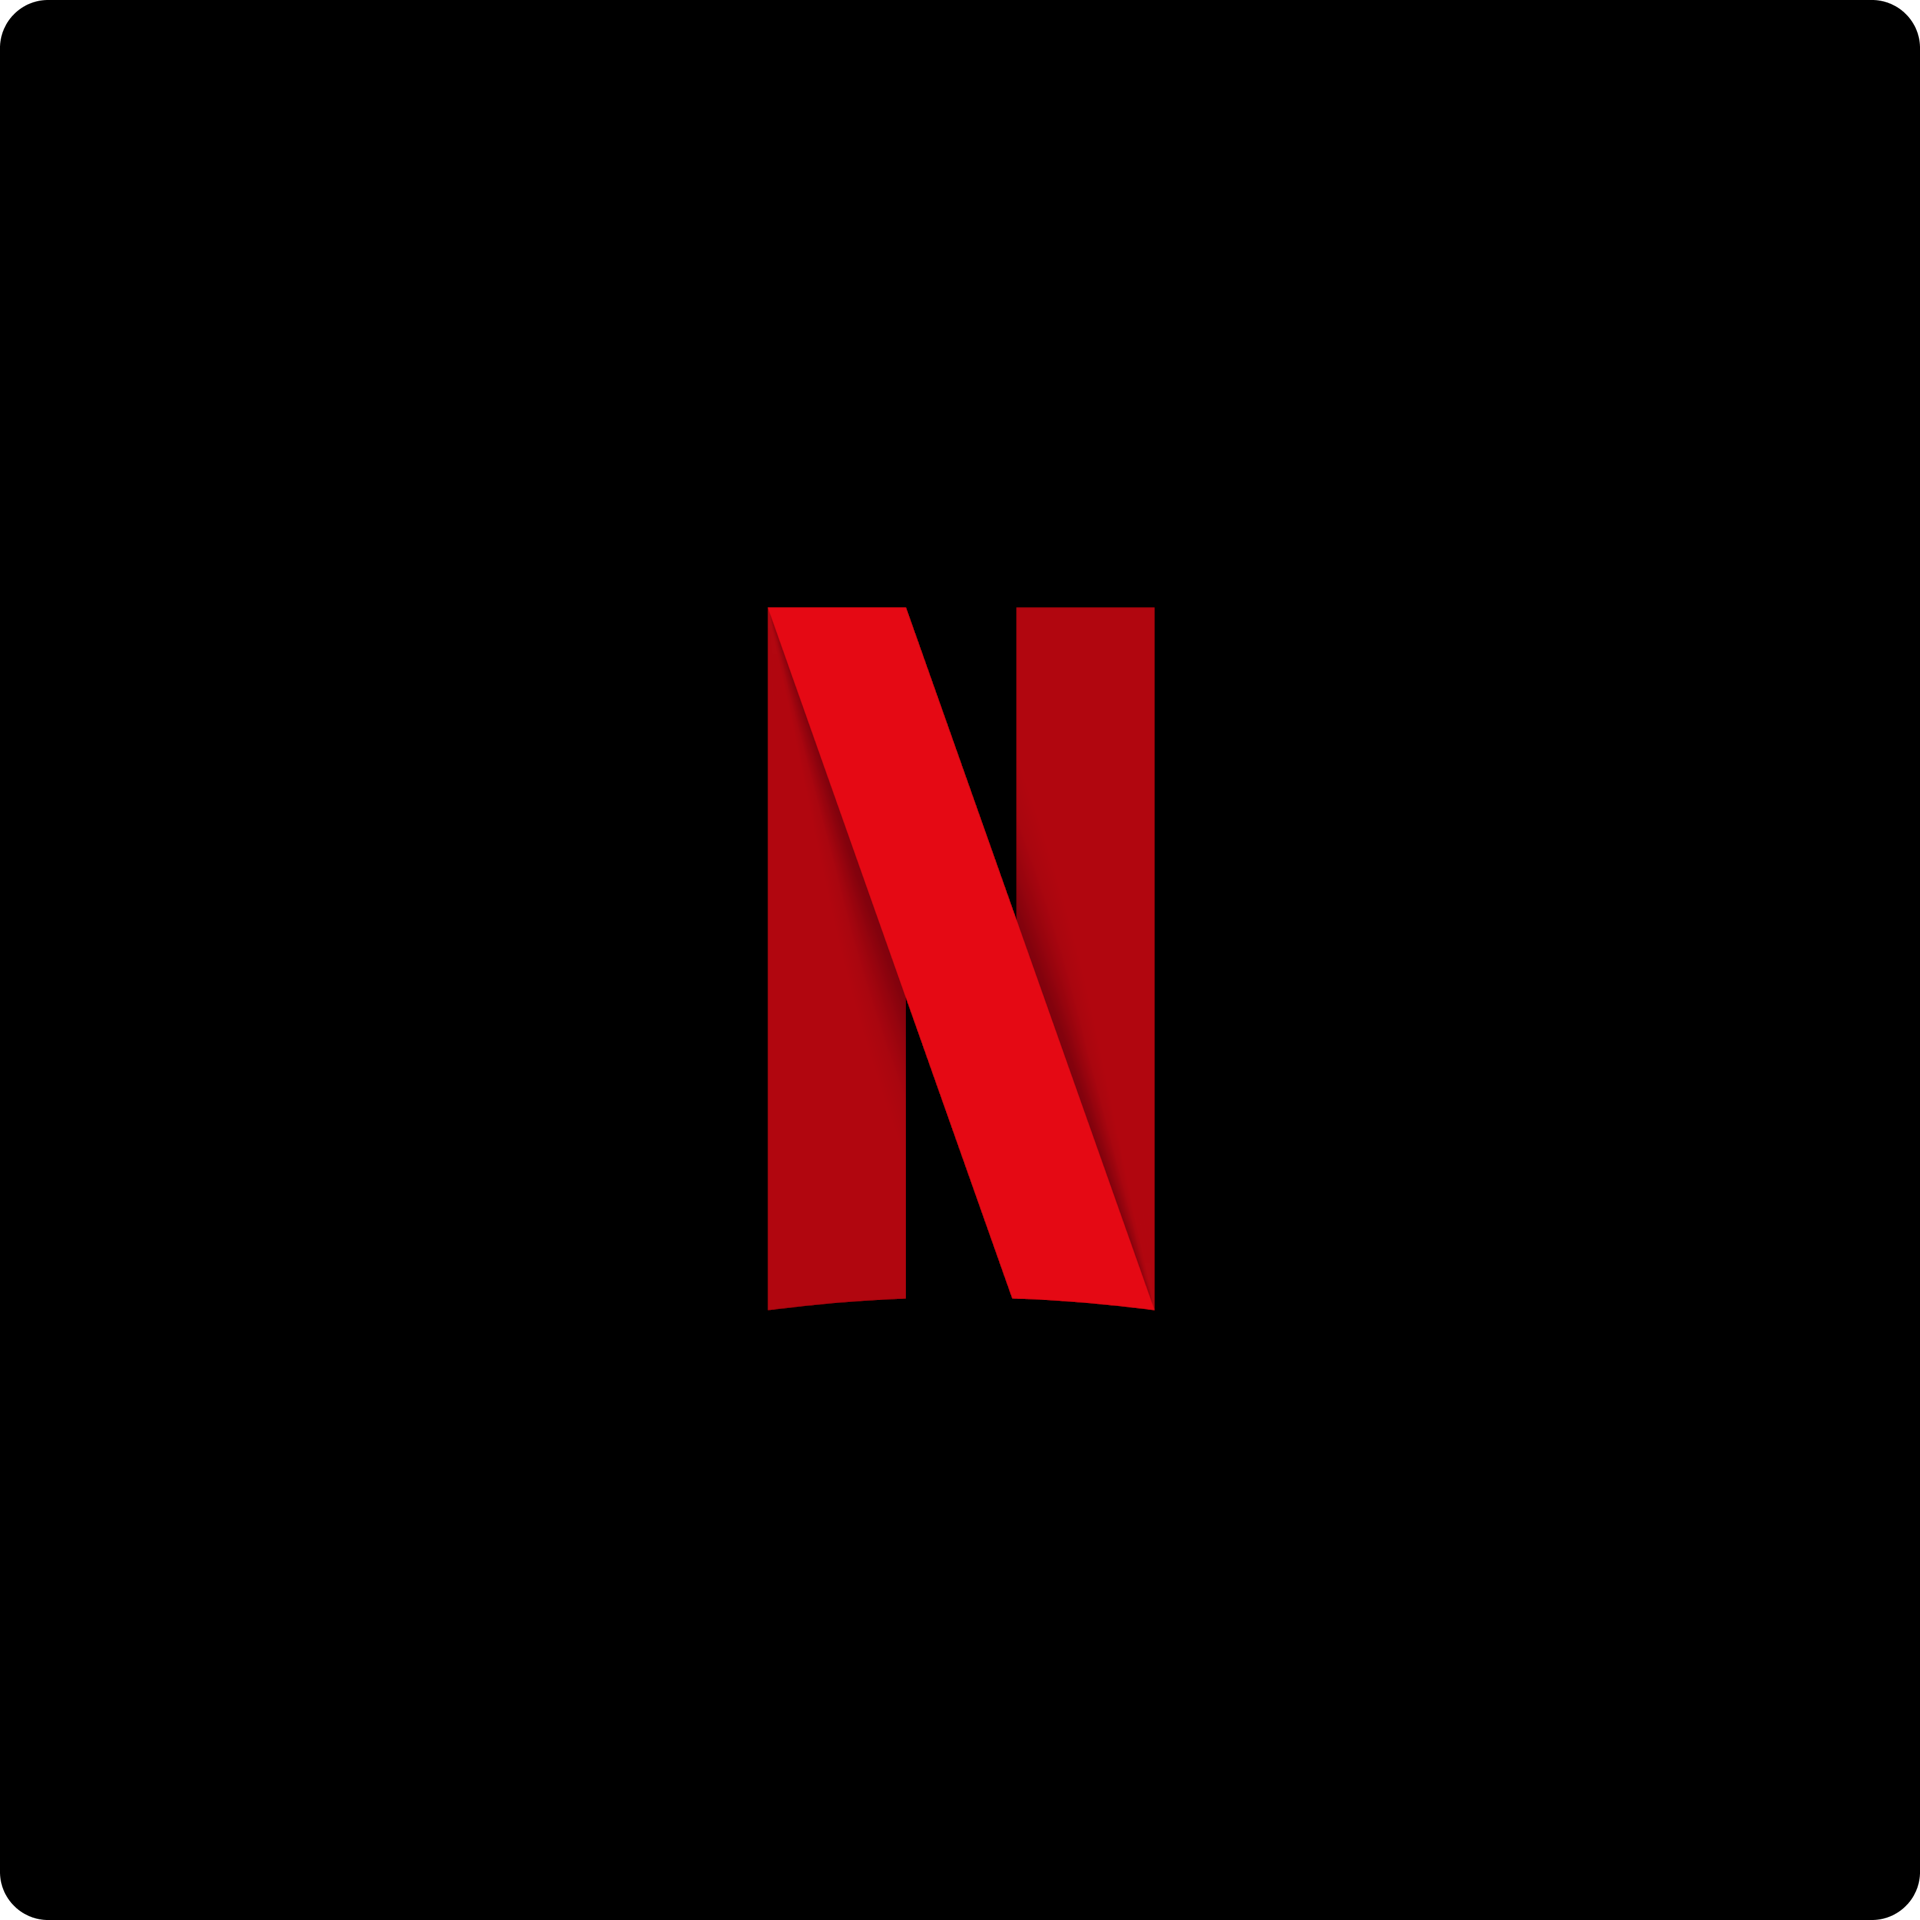 Designs we did for Netflix